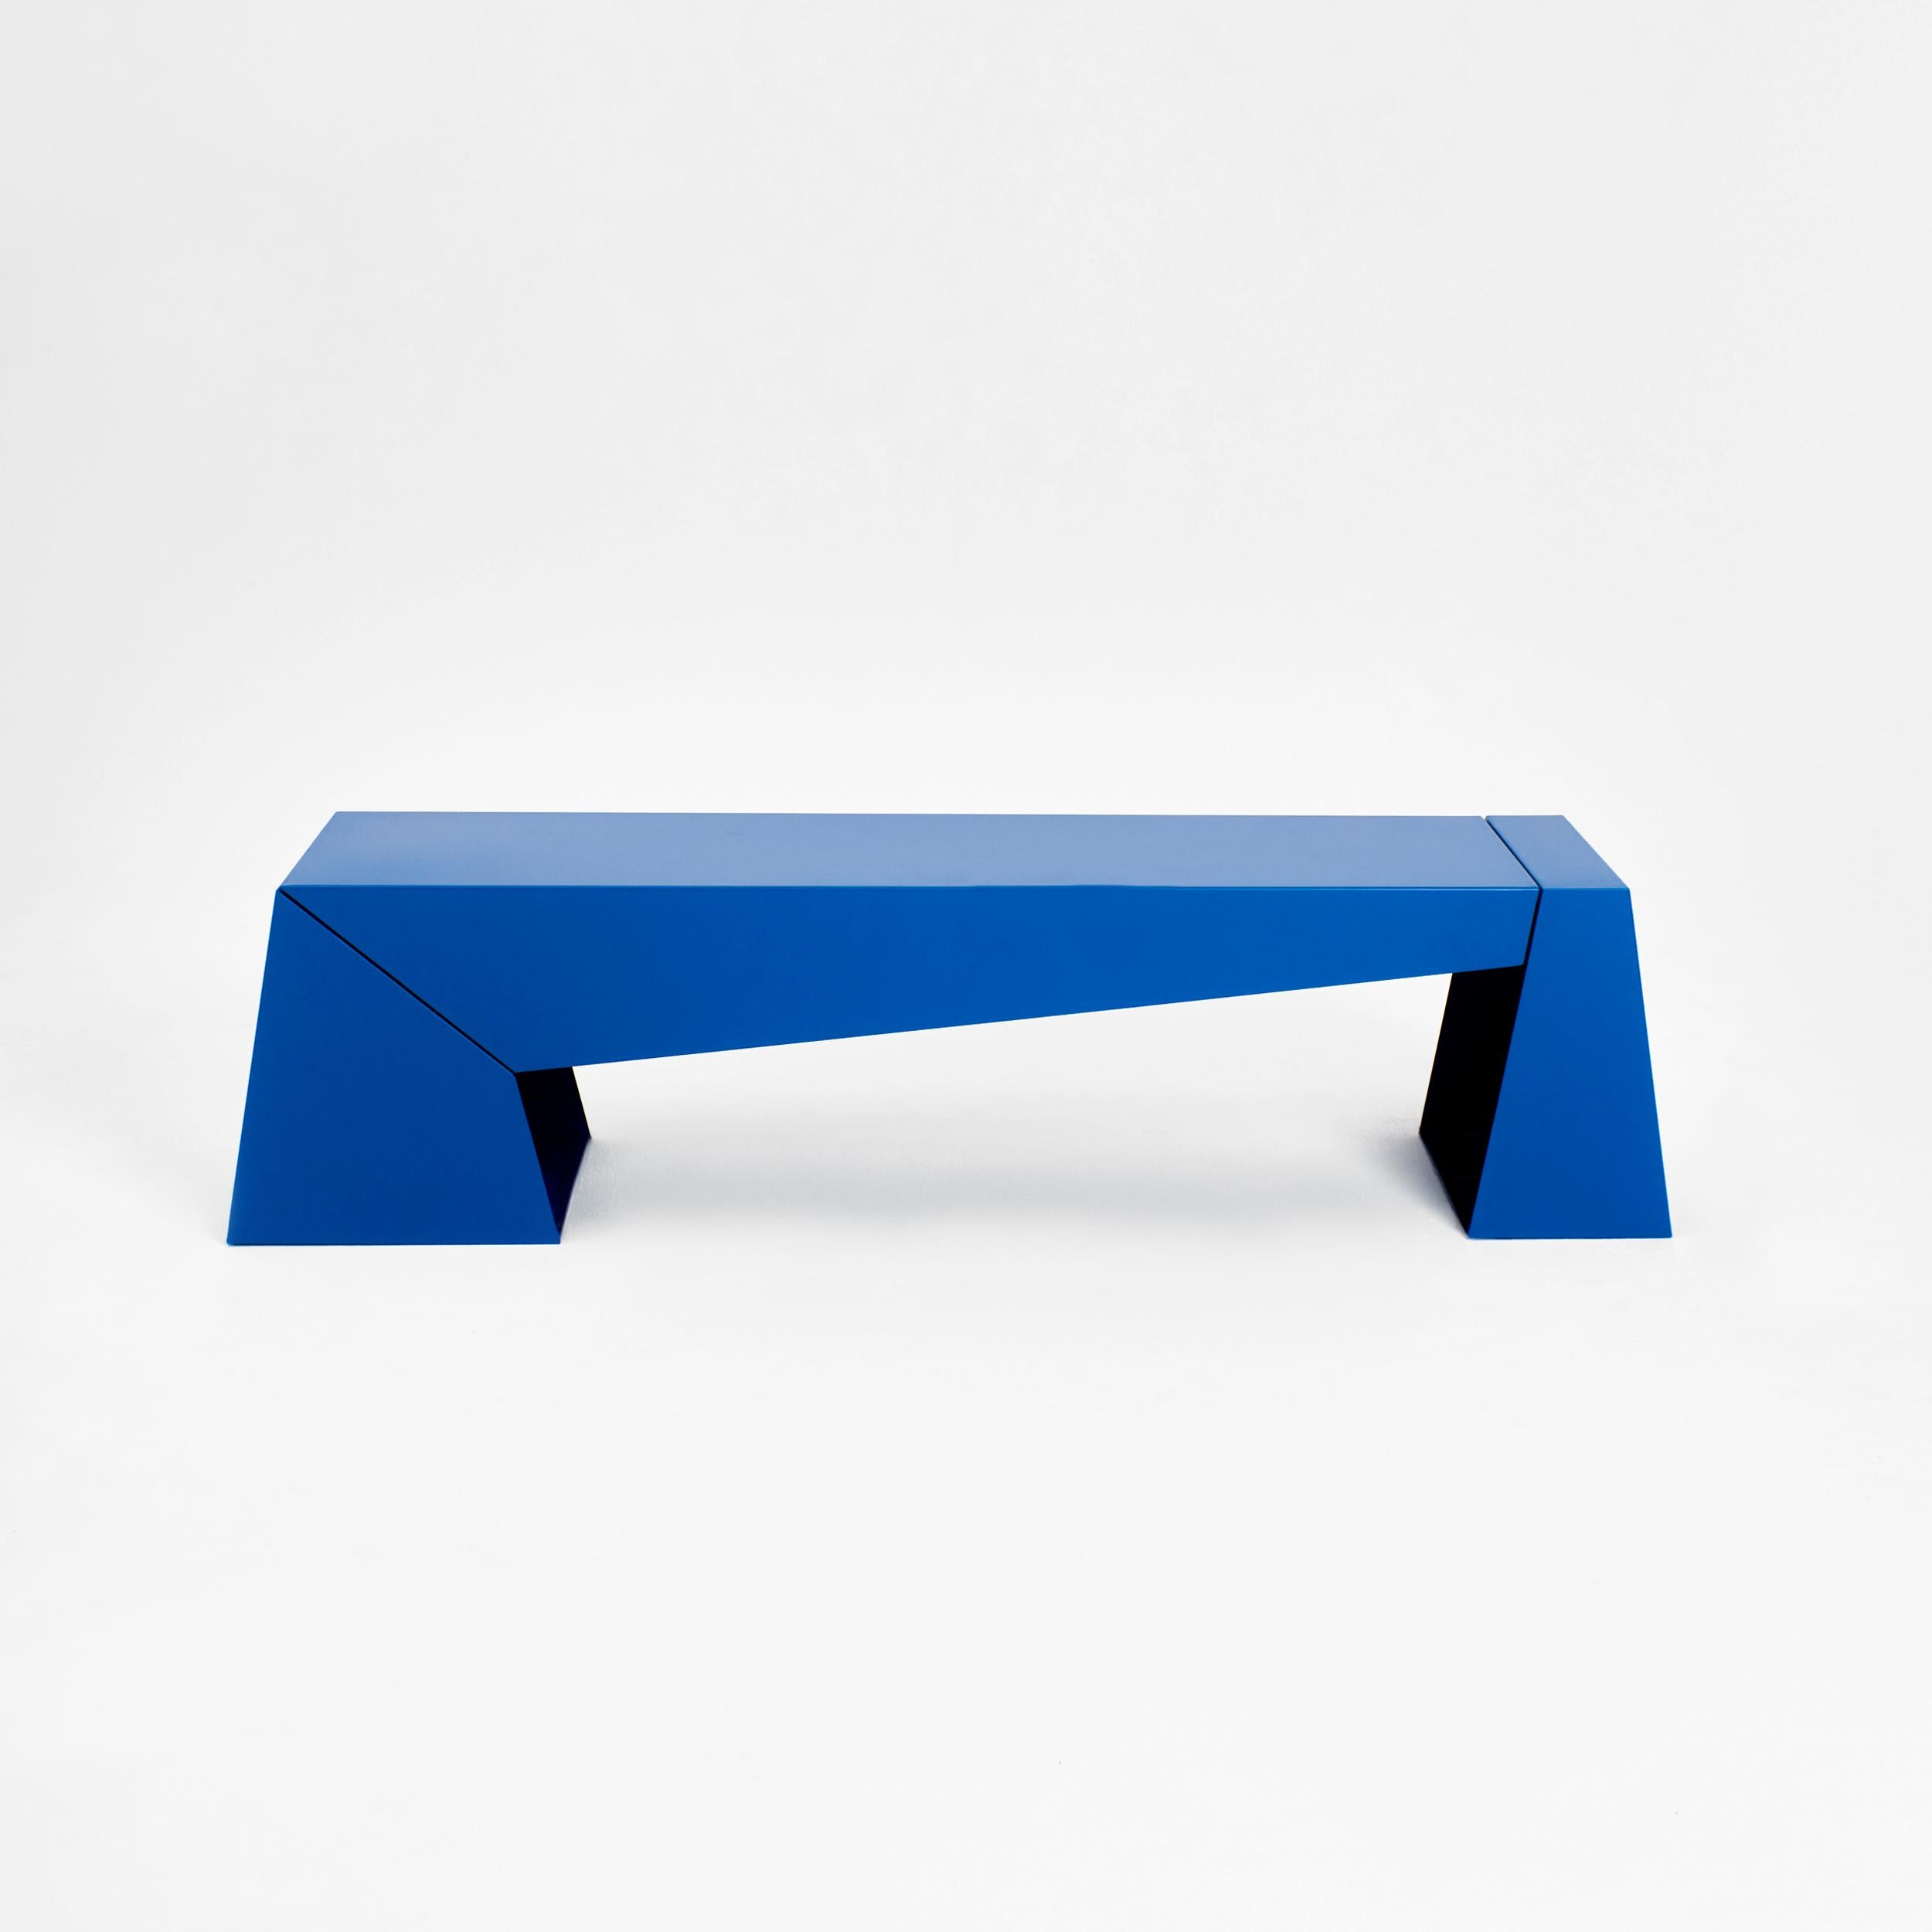 Hand-Crafted Folded Bench